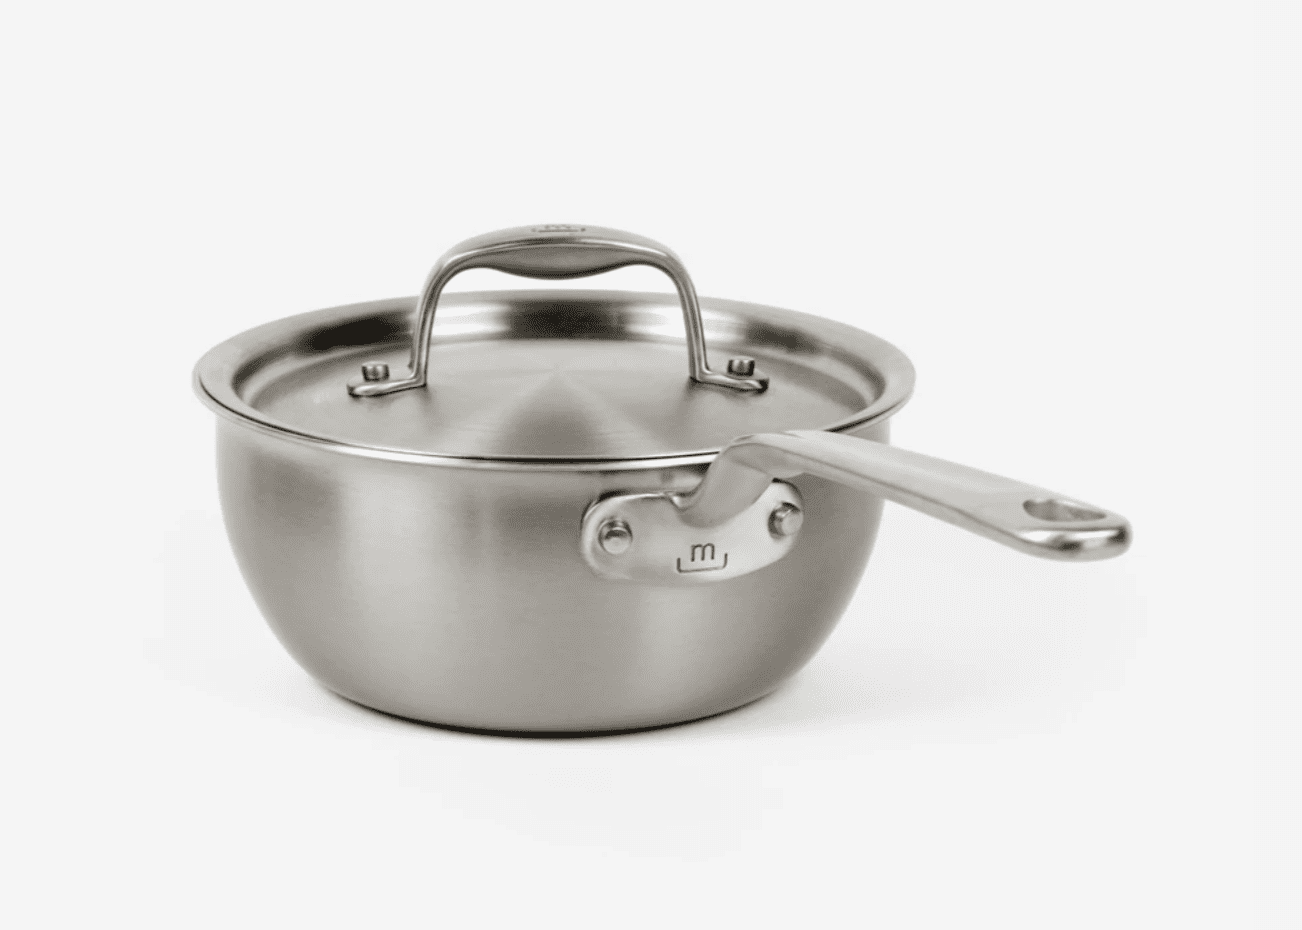 Made In's Popular Stainless Steel Saucier is Back in Stock